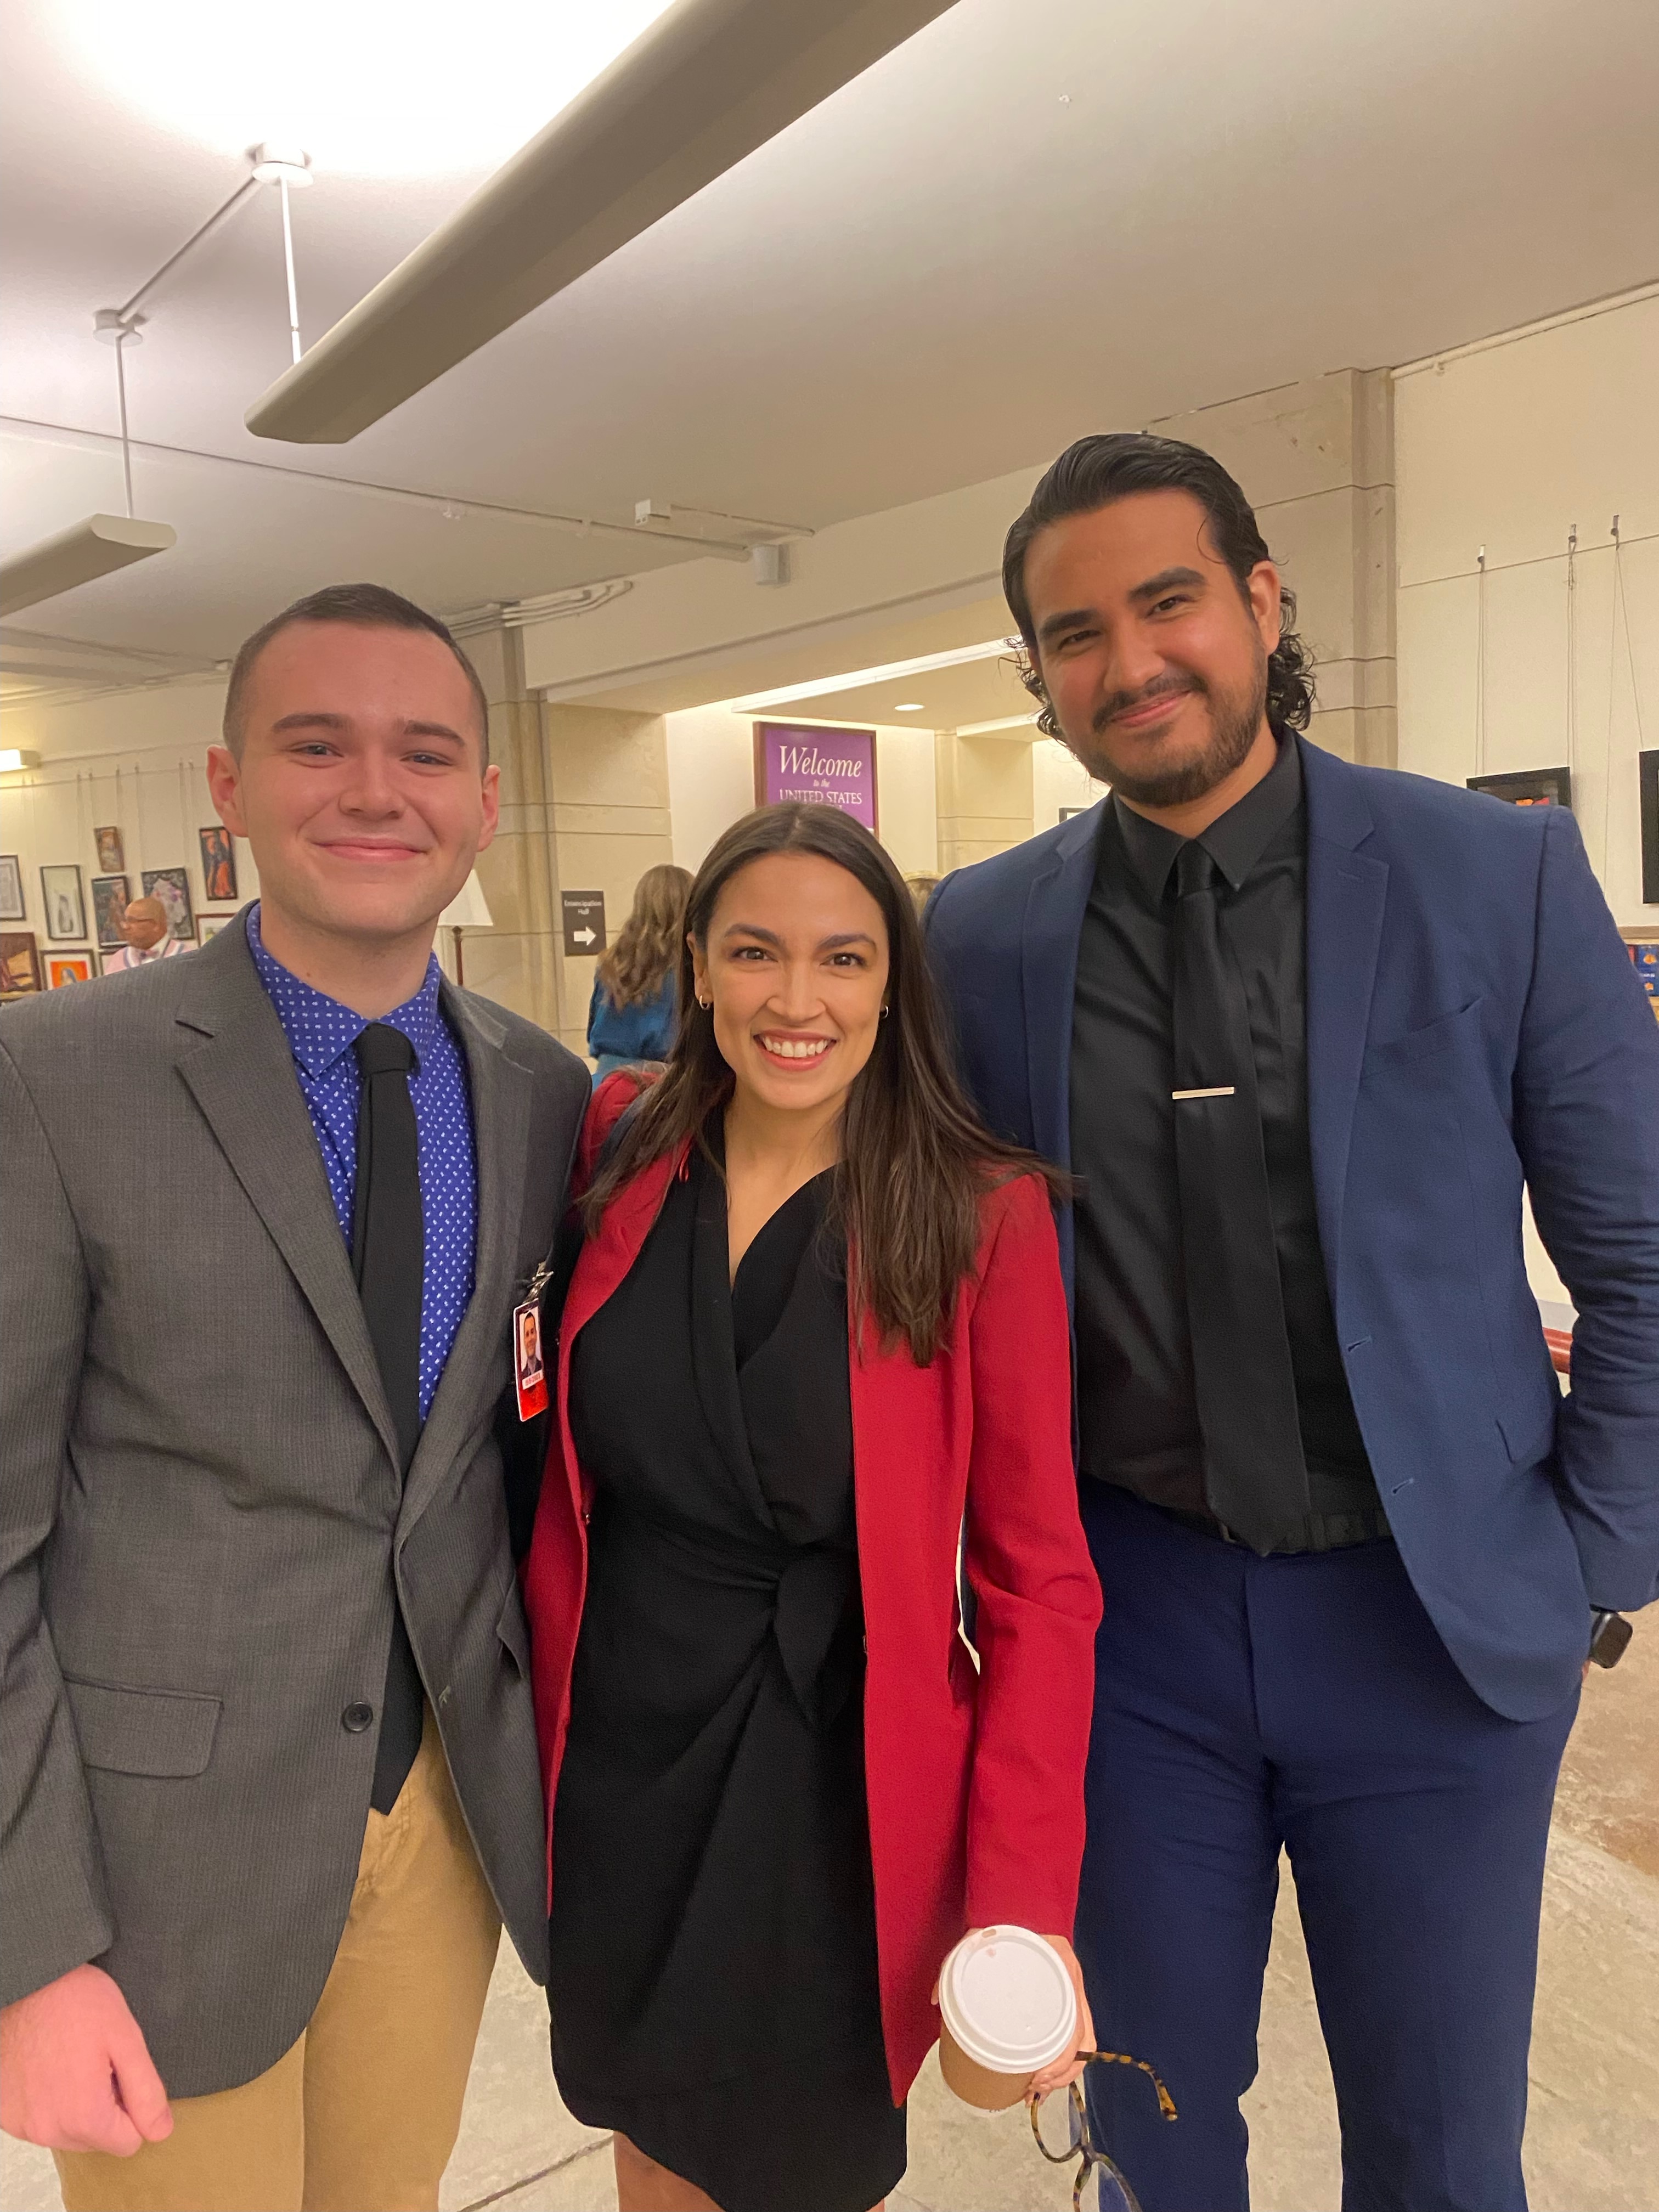 Spring 2023 UCDC Fellow Luis Leon Lopez standing with Rep. AOC